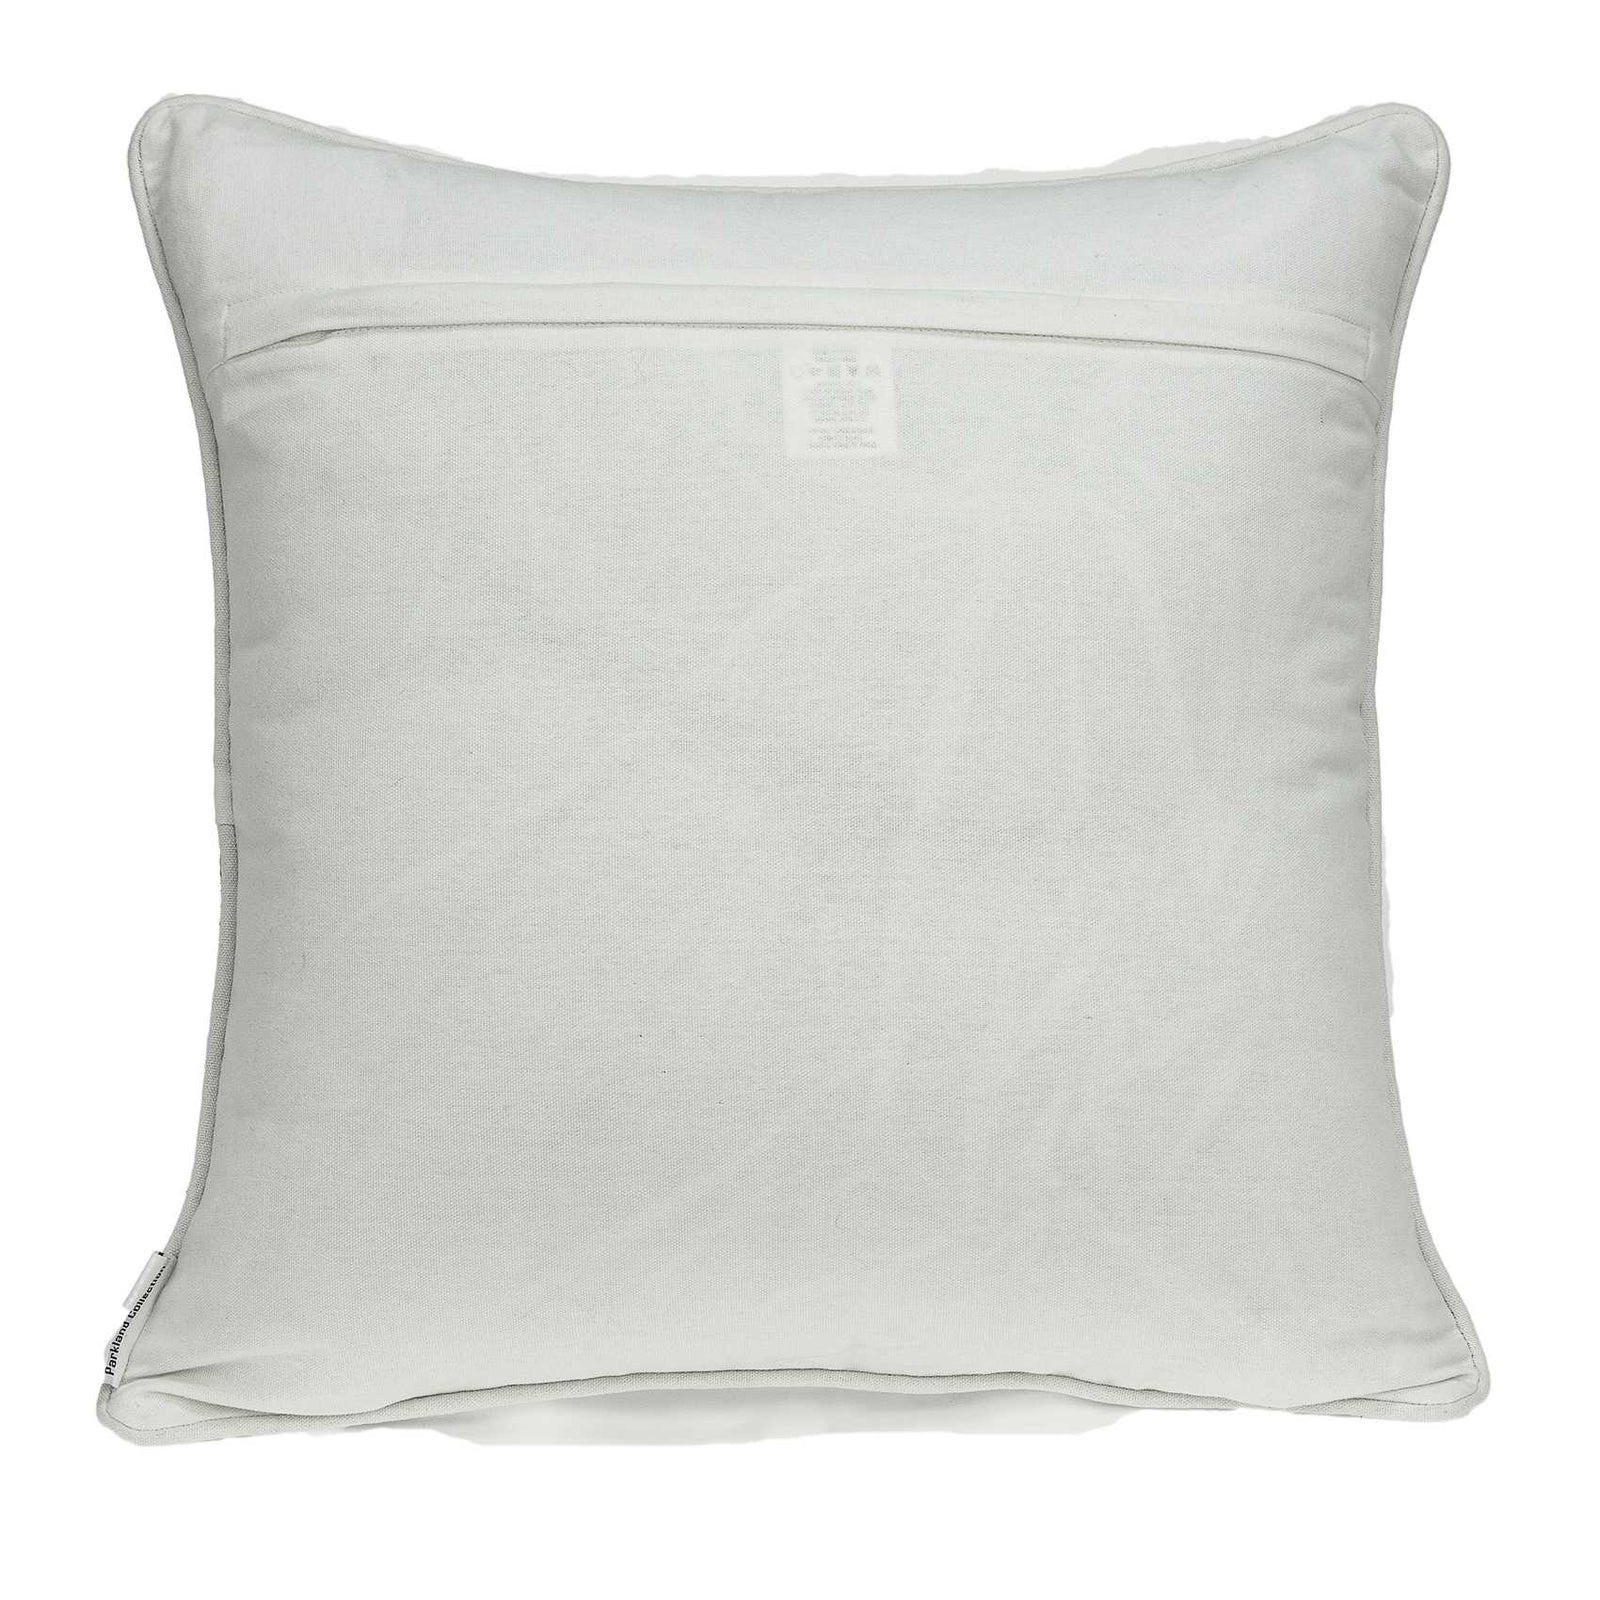 20" X 0.5" X 20" Transitional Gray And White Cotton Pillow Cover